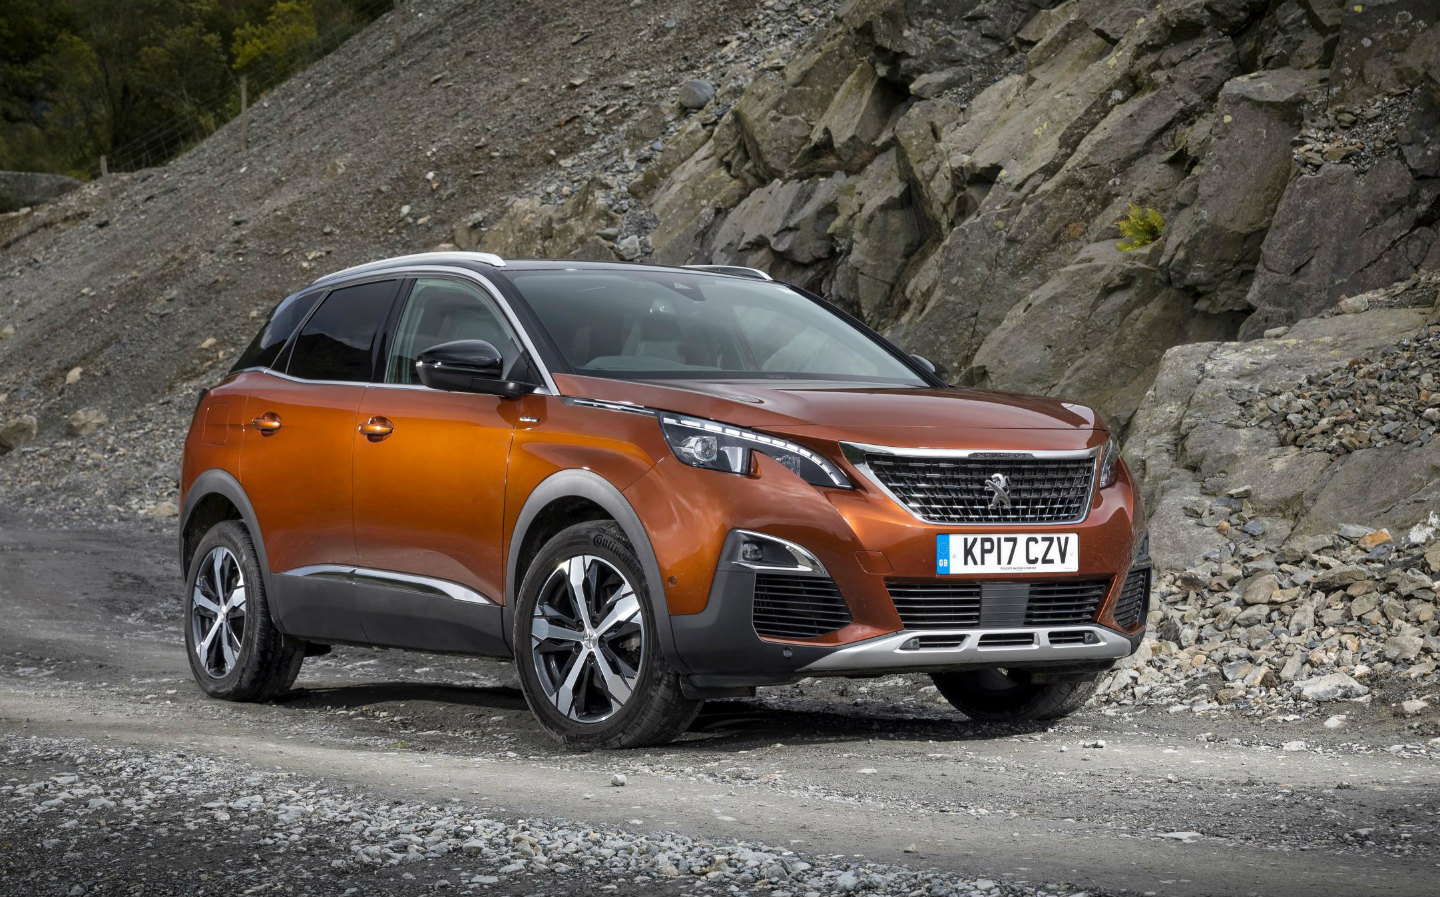 Forget German cars - French Peugeot 3008 is the most reliable, says owner study